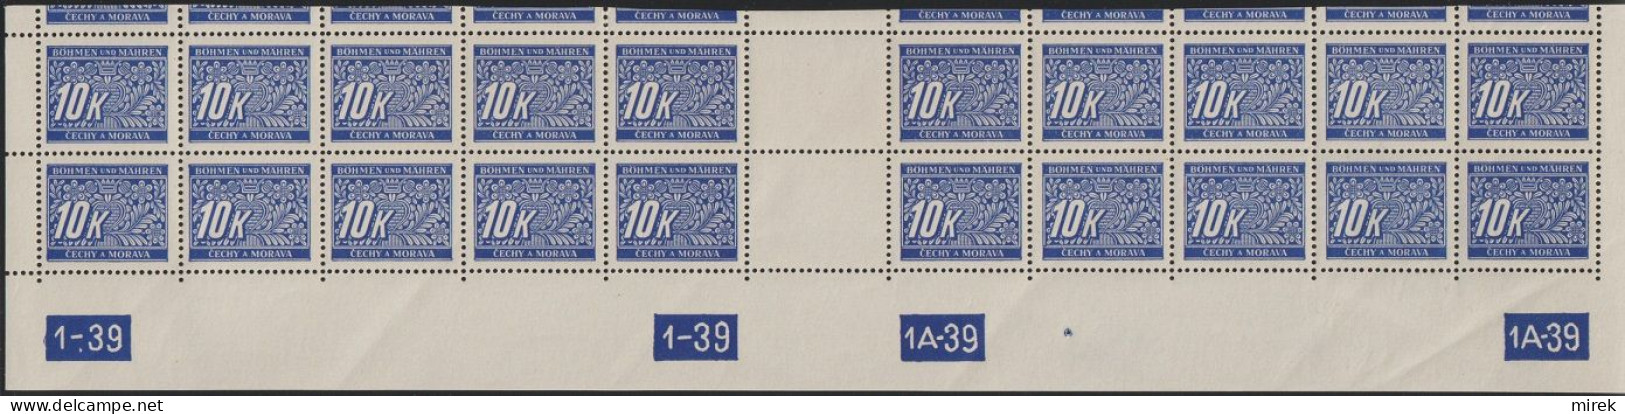 087/ Pof. DL 13, Cut Horizontal Interarchs Strip, Plate Numbers 1-1A-39 - Unused Stamps